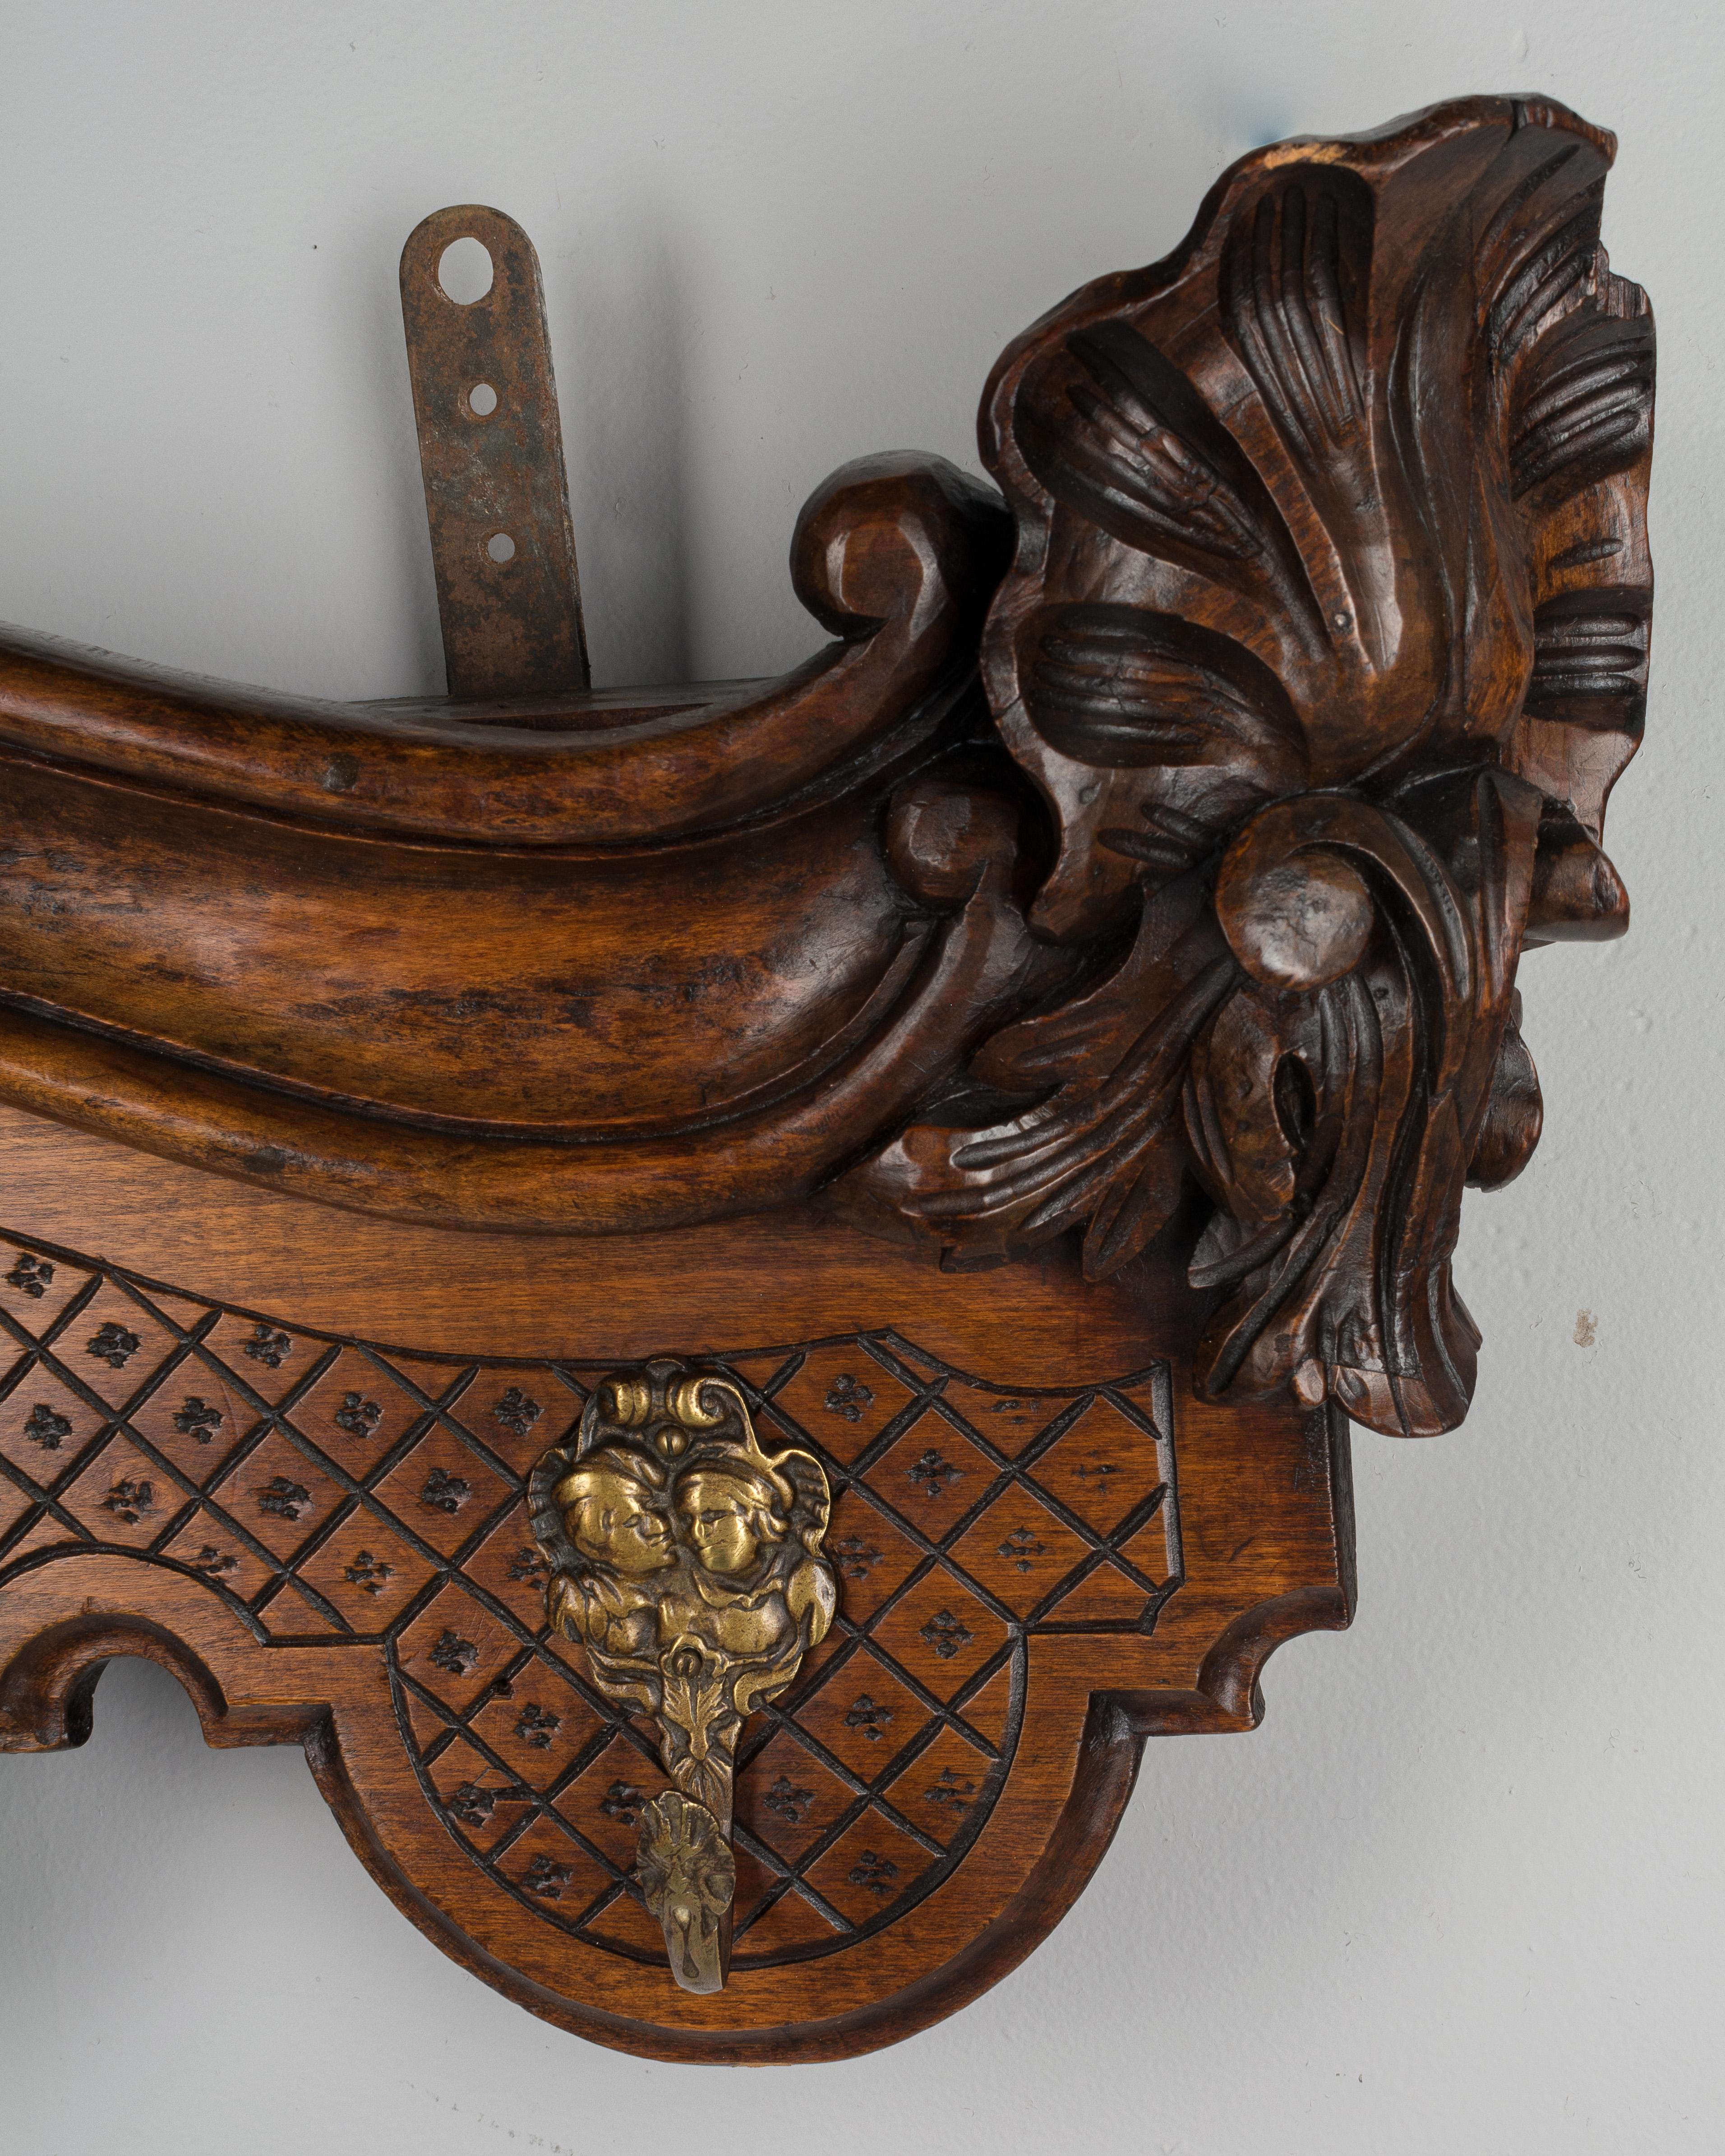 Hand-Carved French Provencal Potiere or Pot Rack